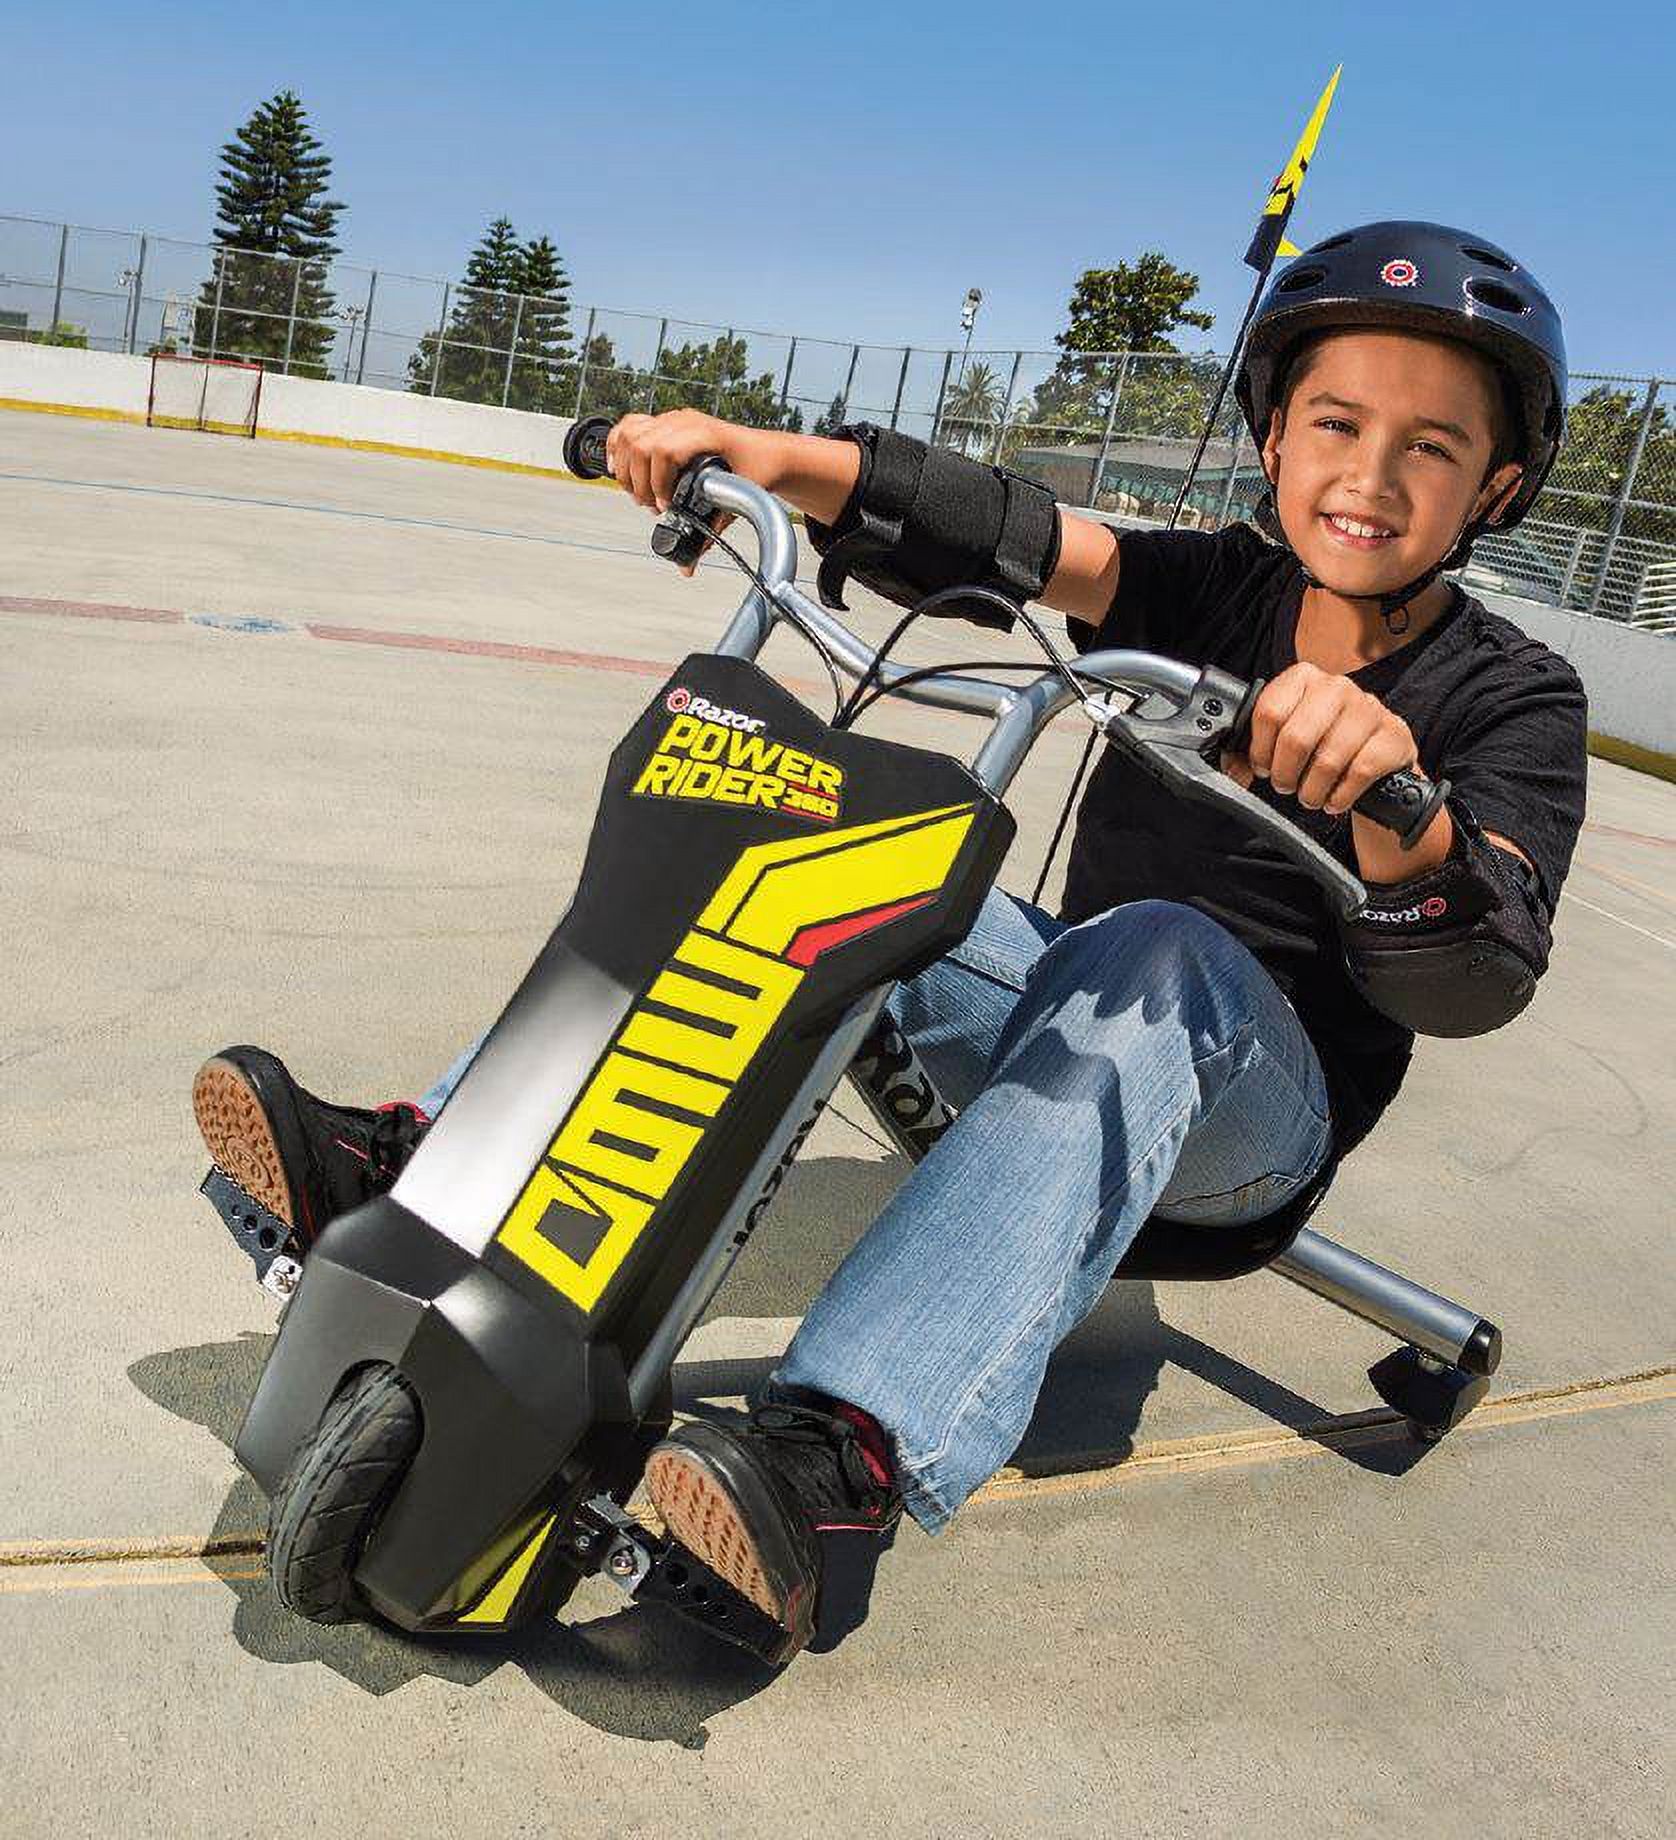 Razor PowerRider 360 - Electric Tricycle, up to 9 mph, 12V Powered Ride-on for Ages 8 and up - image 3 of 9